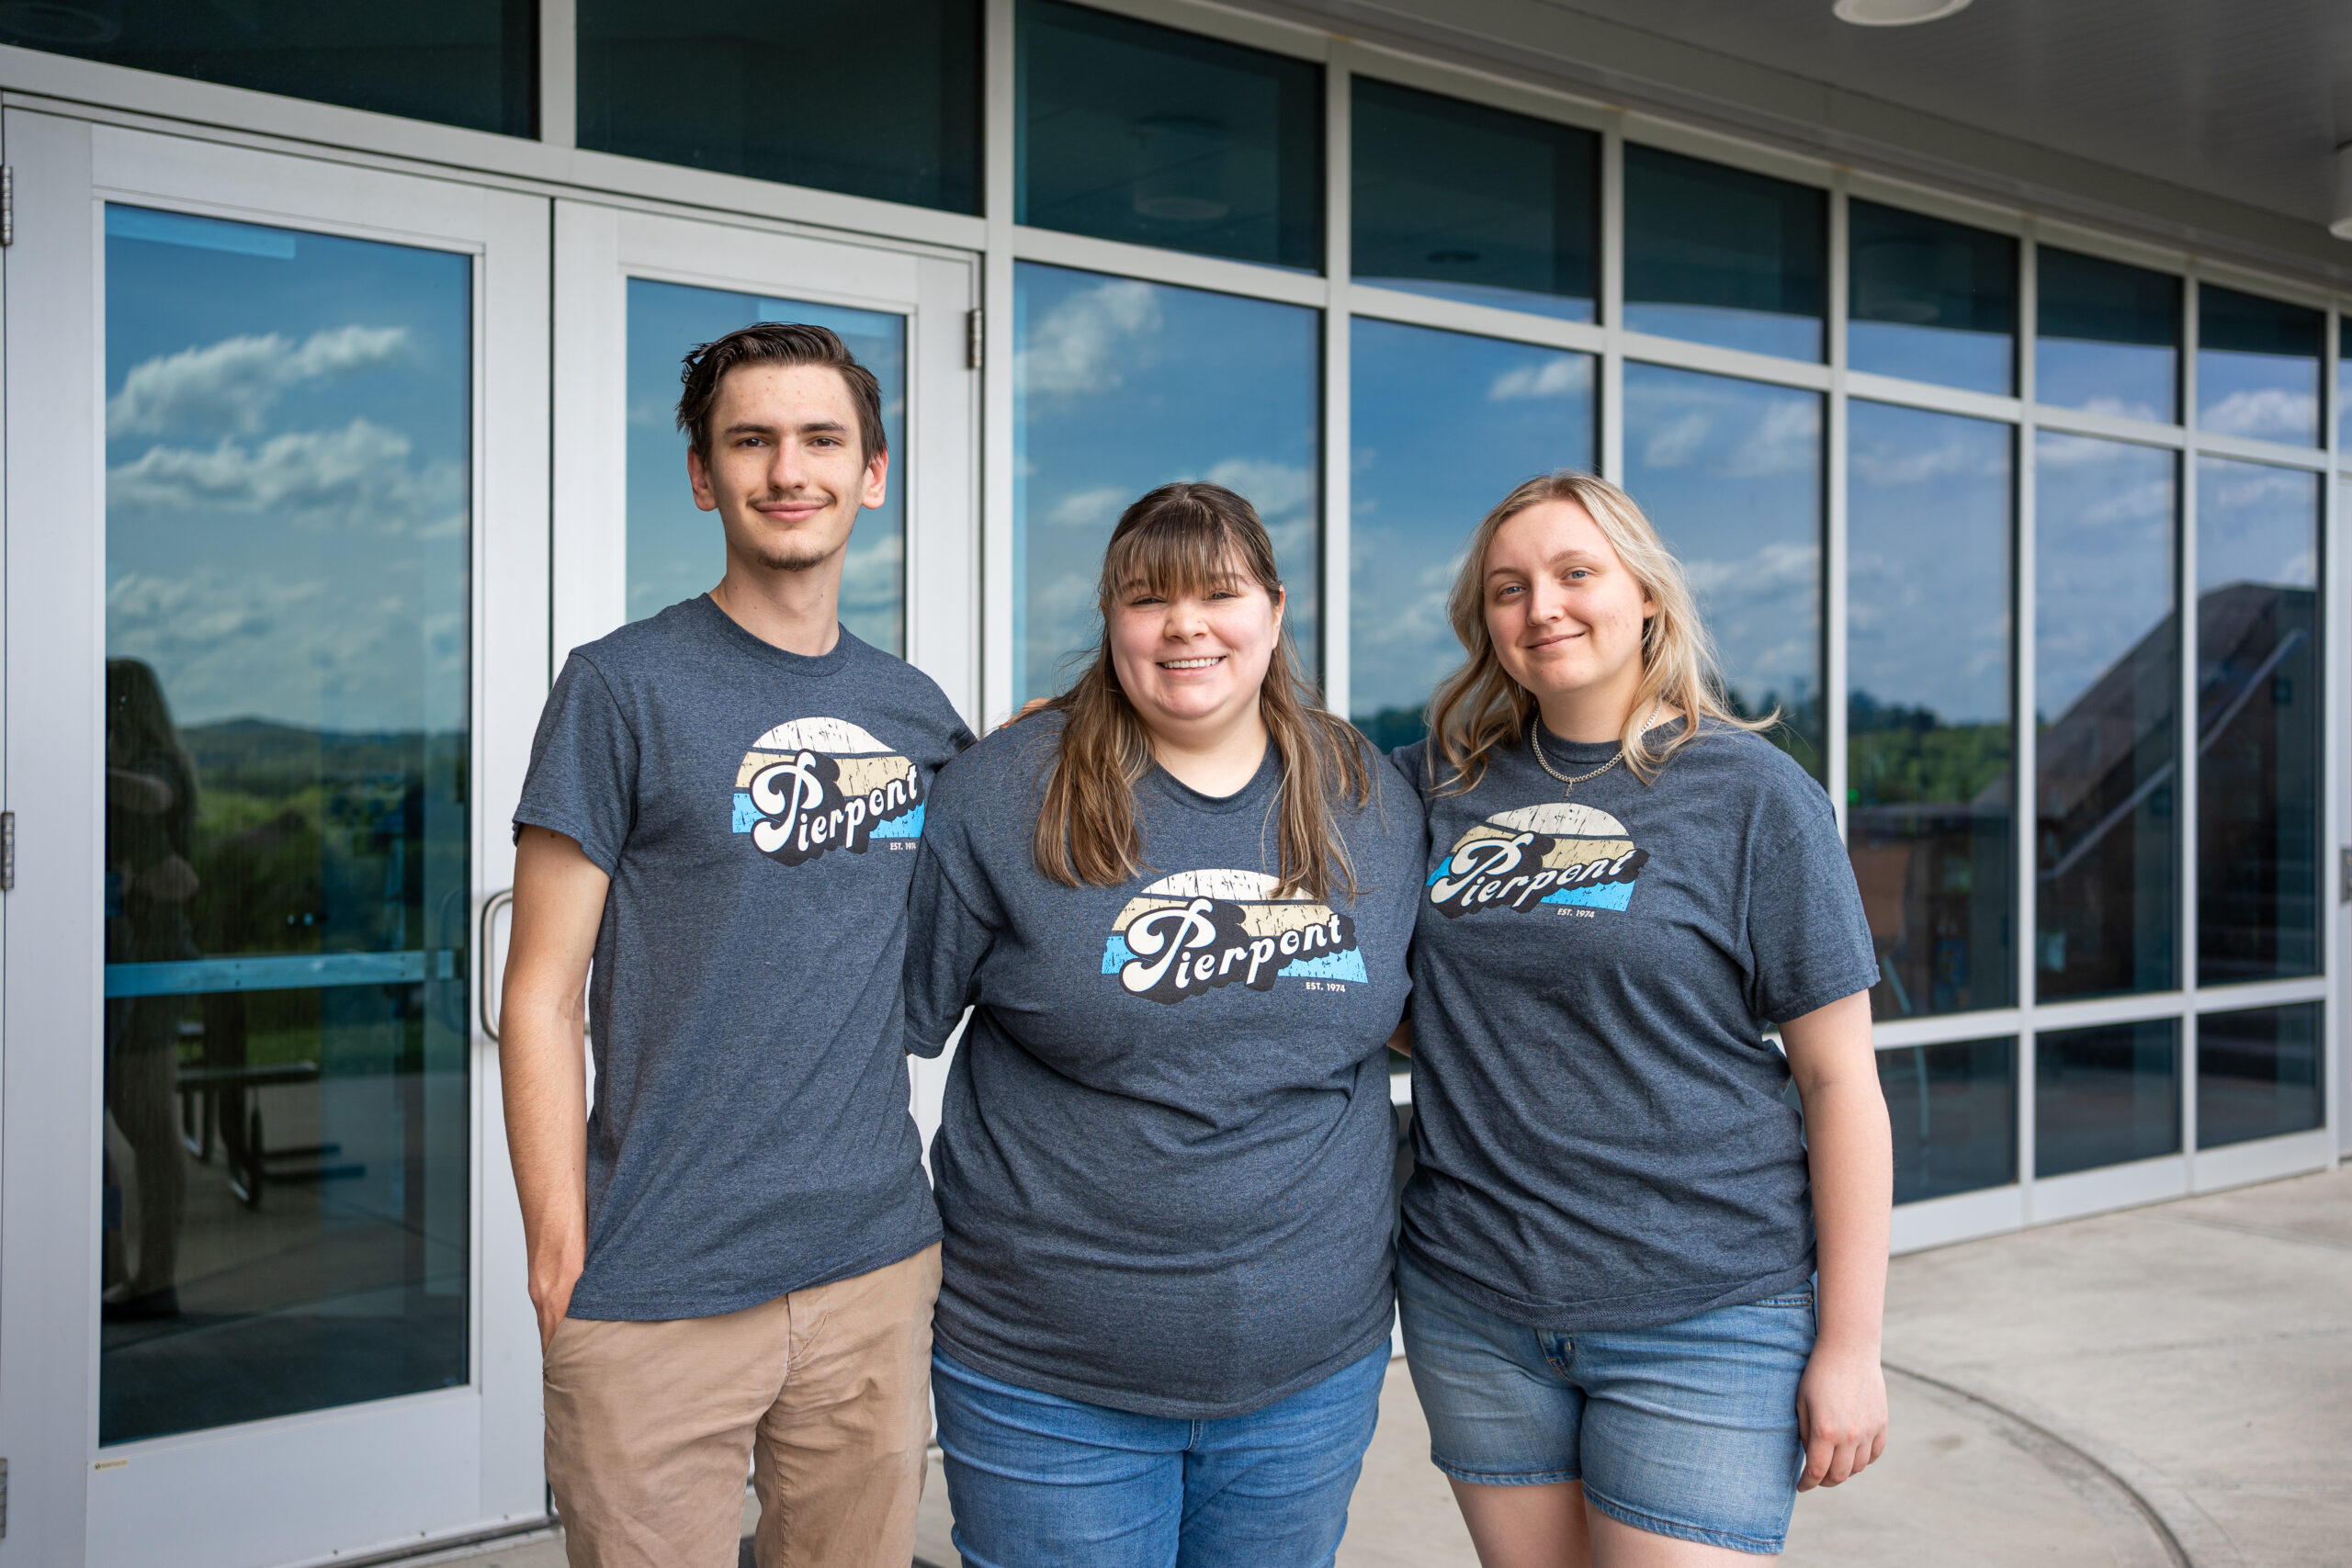 Pierpont's new SGA leadership are pictured standing in front of a wall of windows.